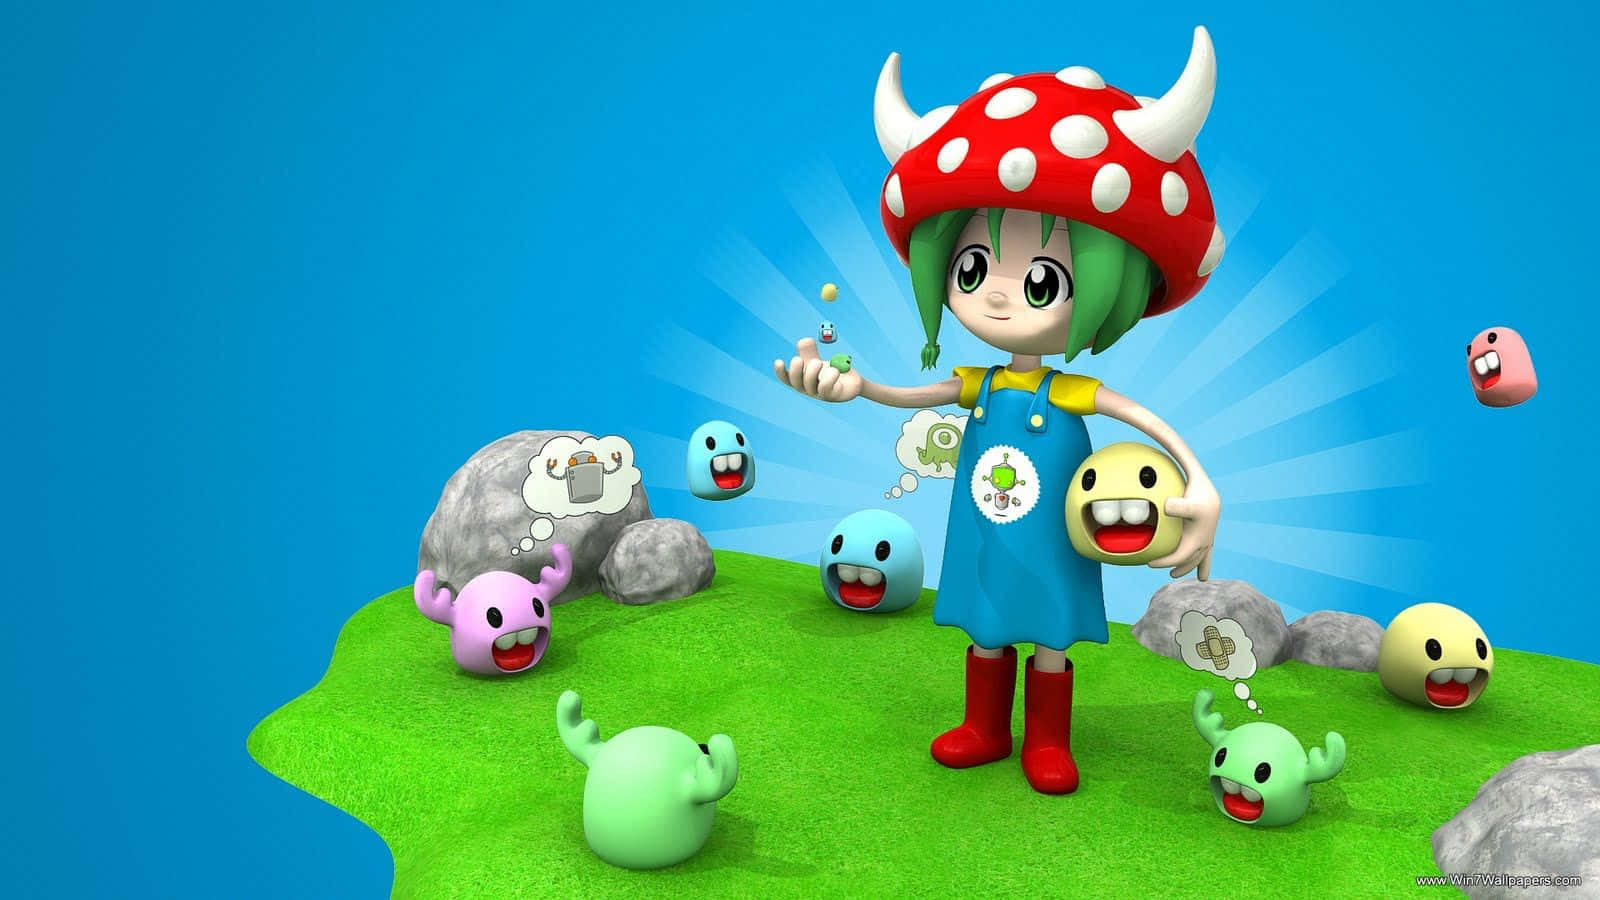 A Girl With A Mushroom Hat And A Mushroom In Her Hands